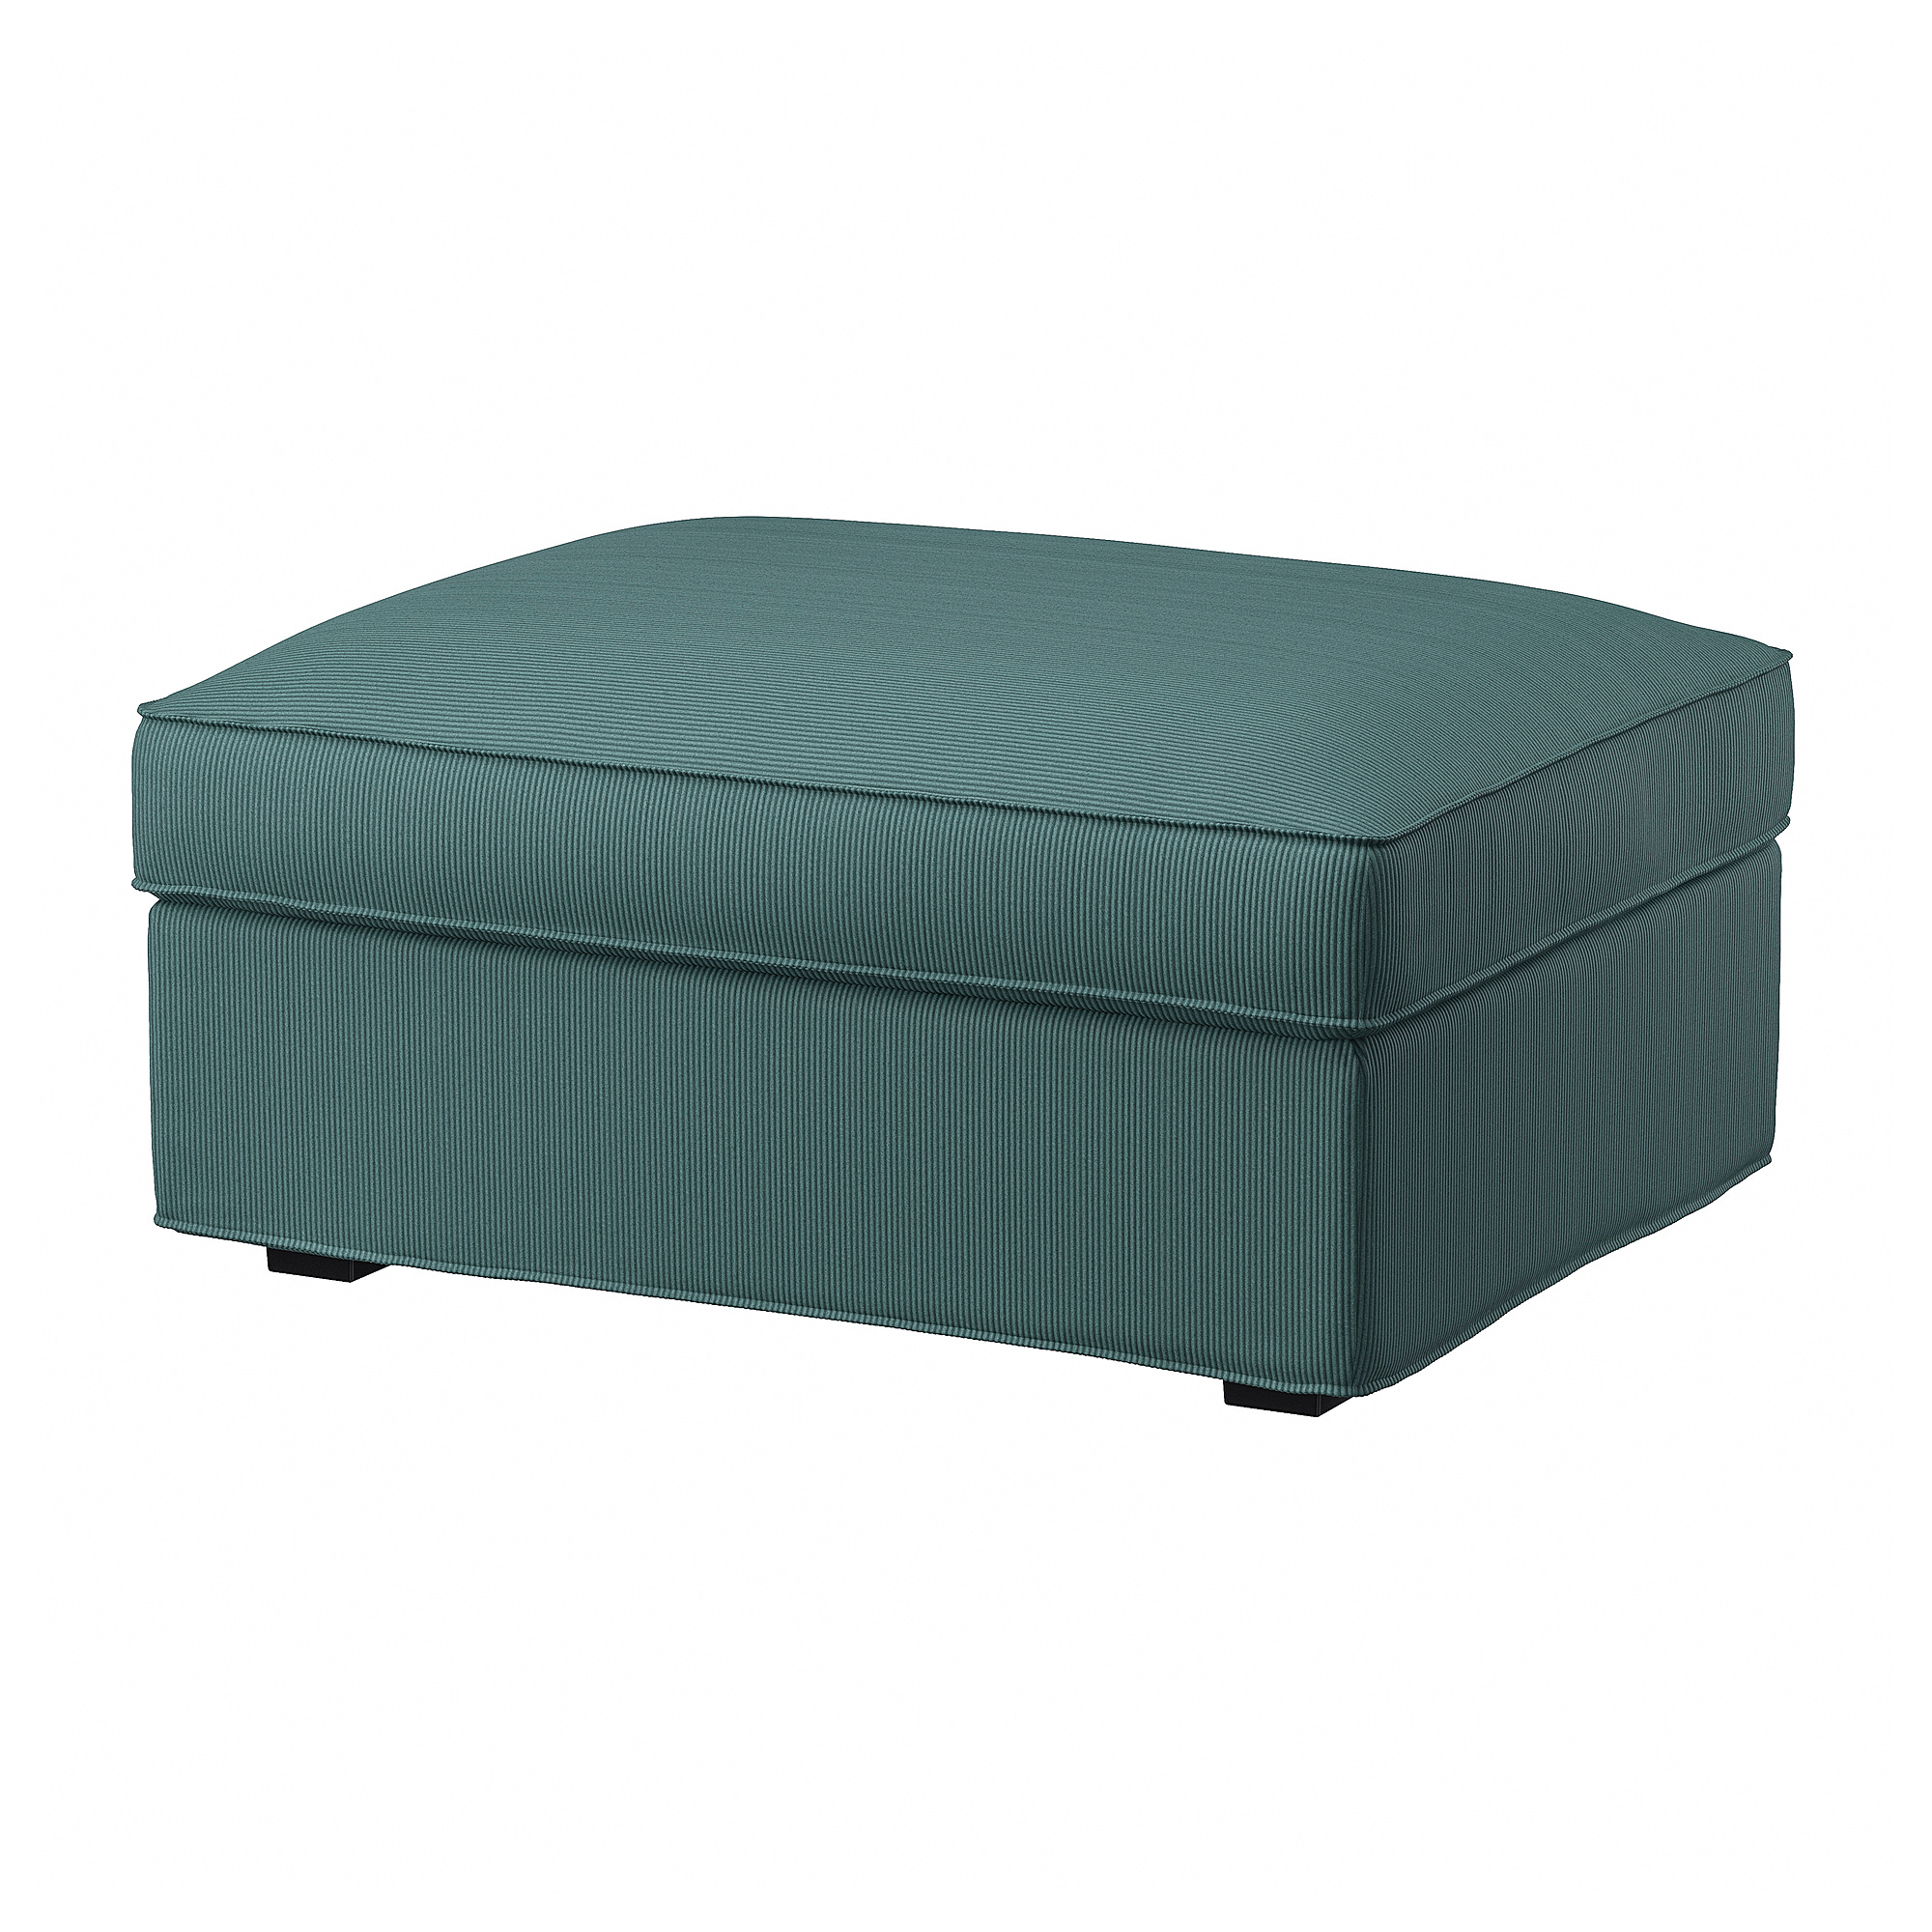 KIVIK cover for footstool with storage